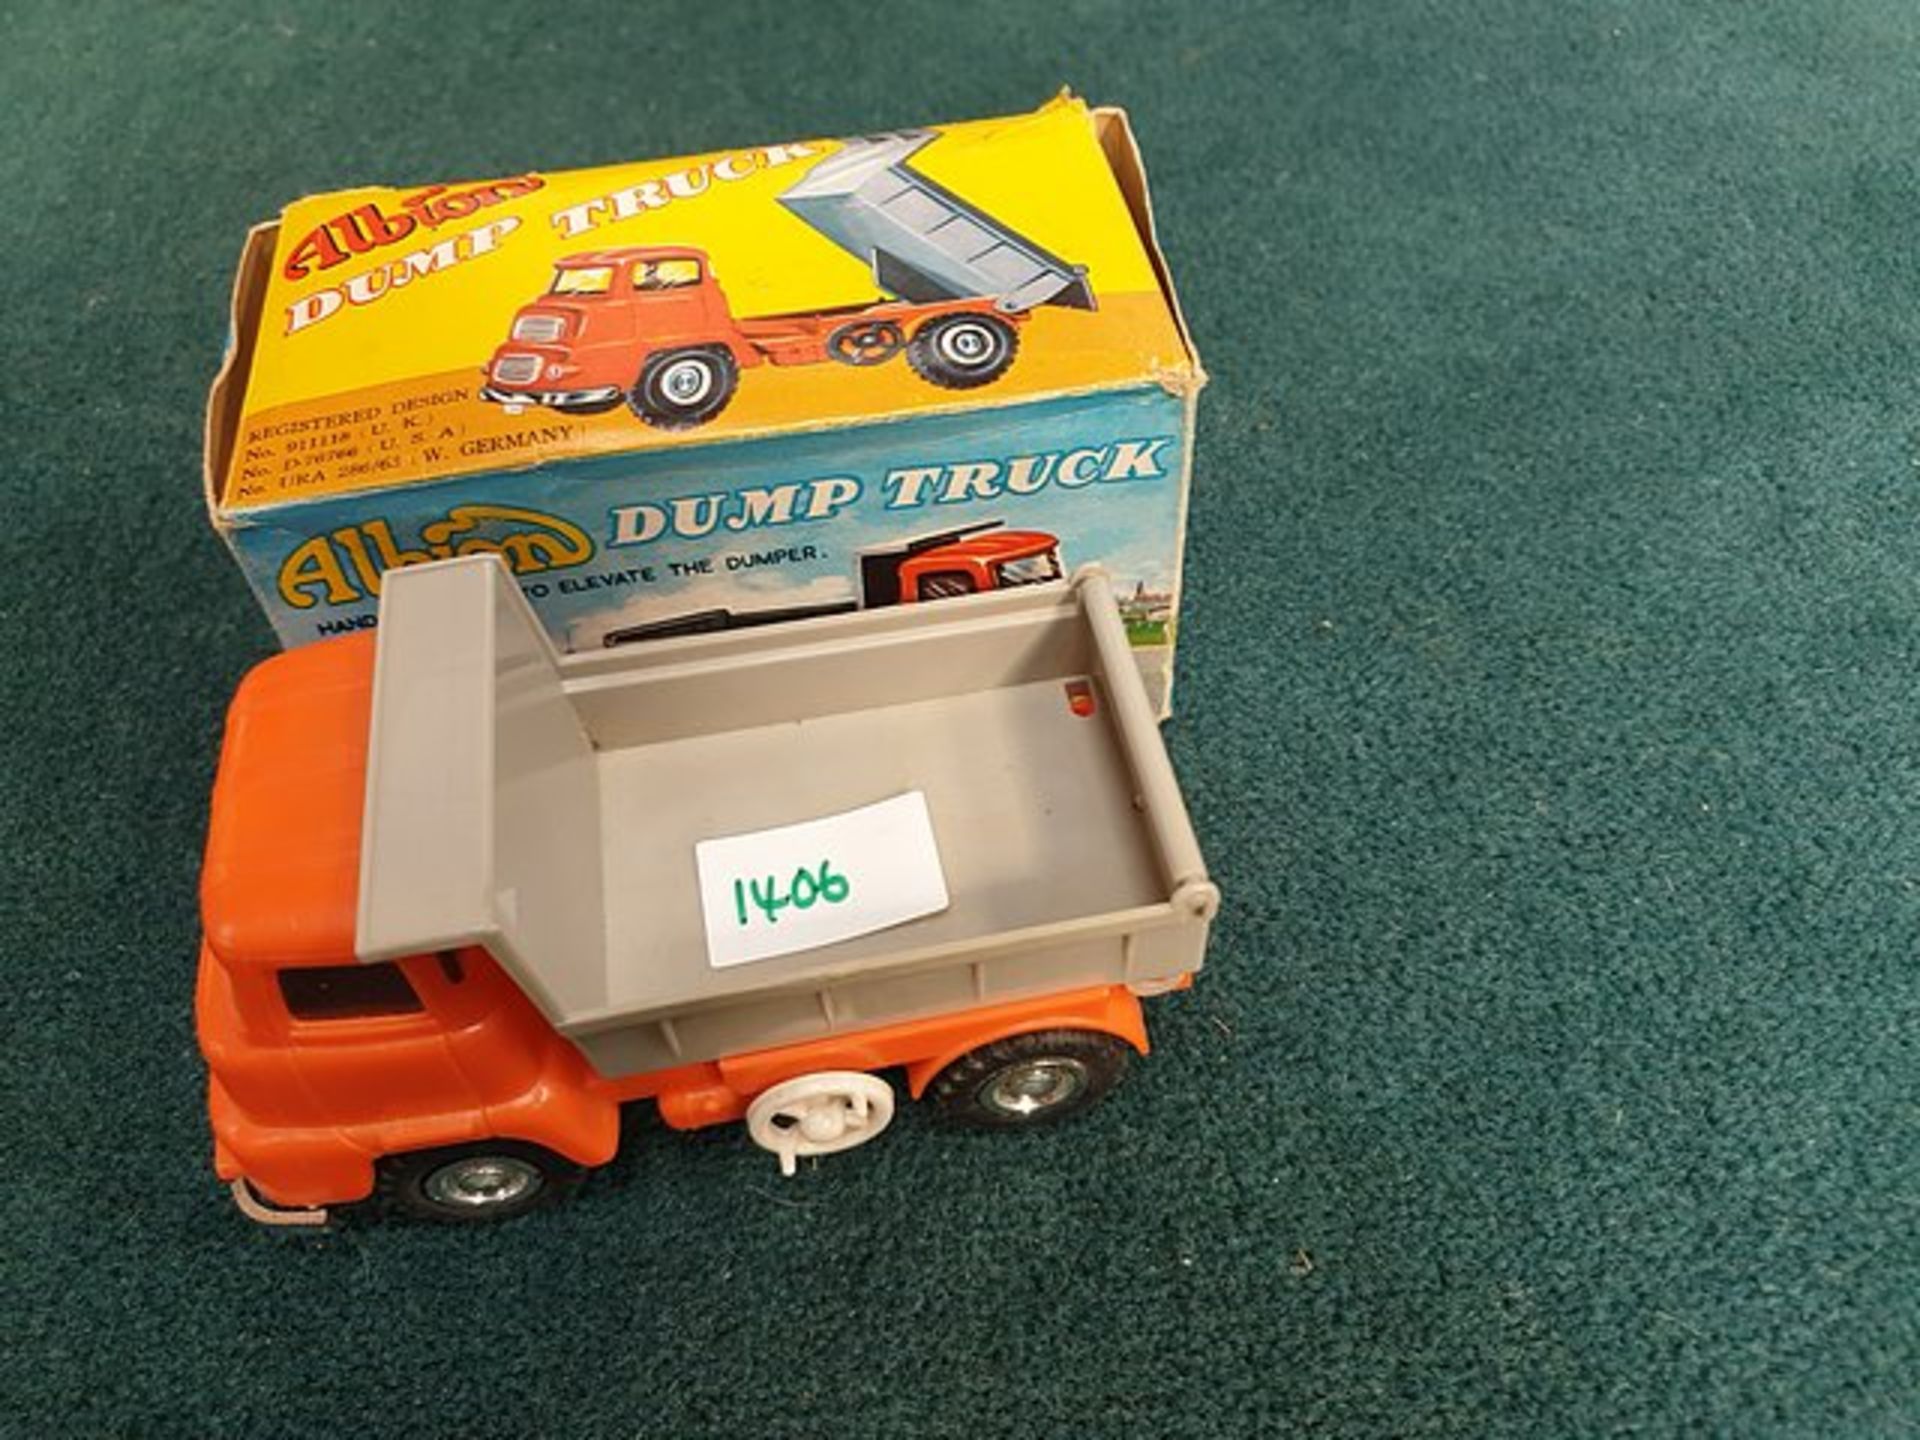 OK Toys (Hong Kong) # 3748 Friction Albion Dump Truck Complete With Box - Image 2 of 2